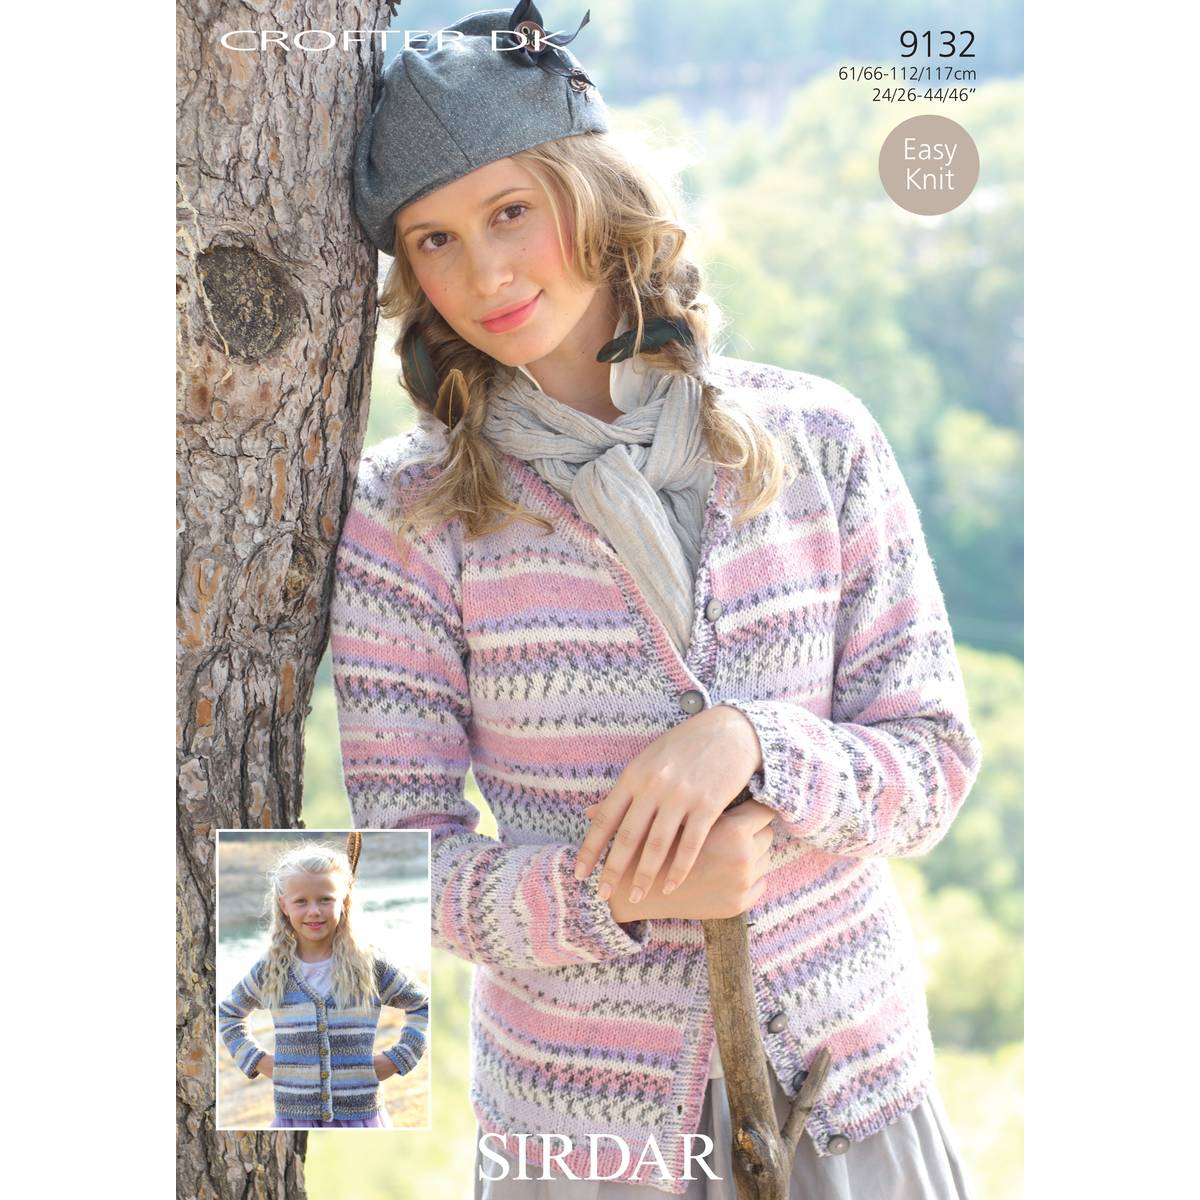 Double Knitting Patterns For Babies Free Free Pattern Knit Sirdar Crofter Dk Ladies Cardigans Hobcraft